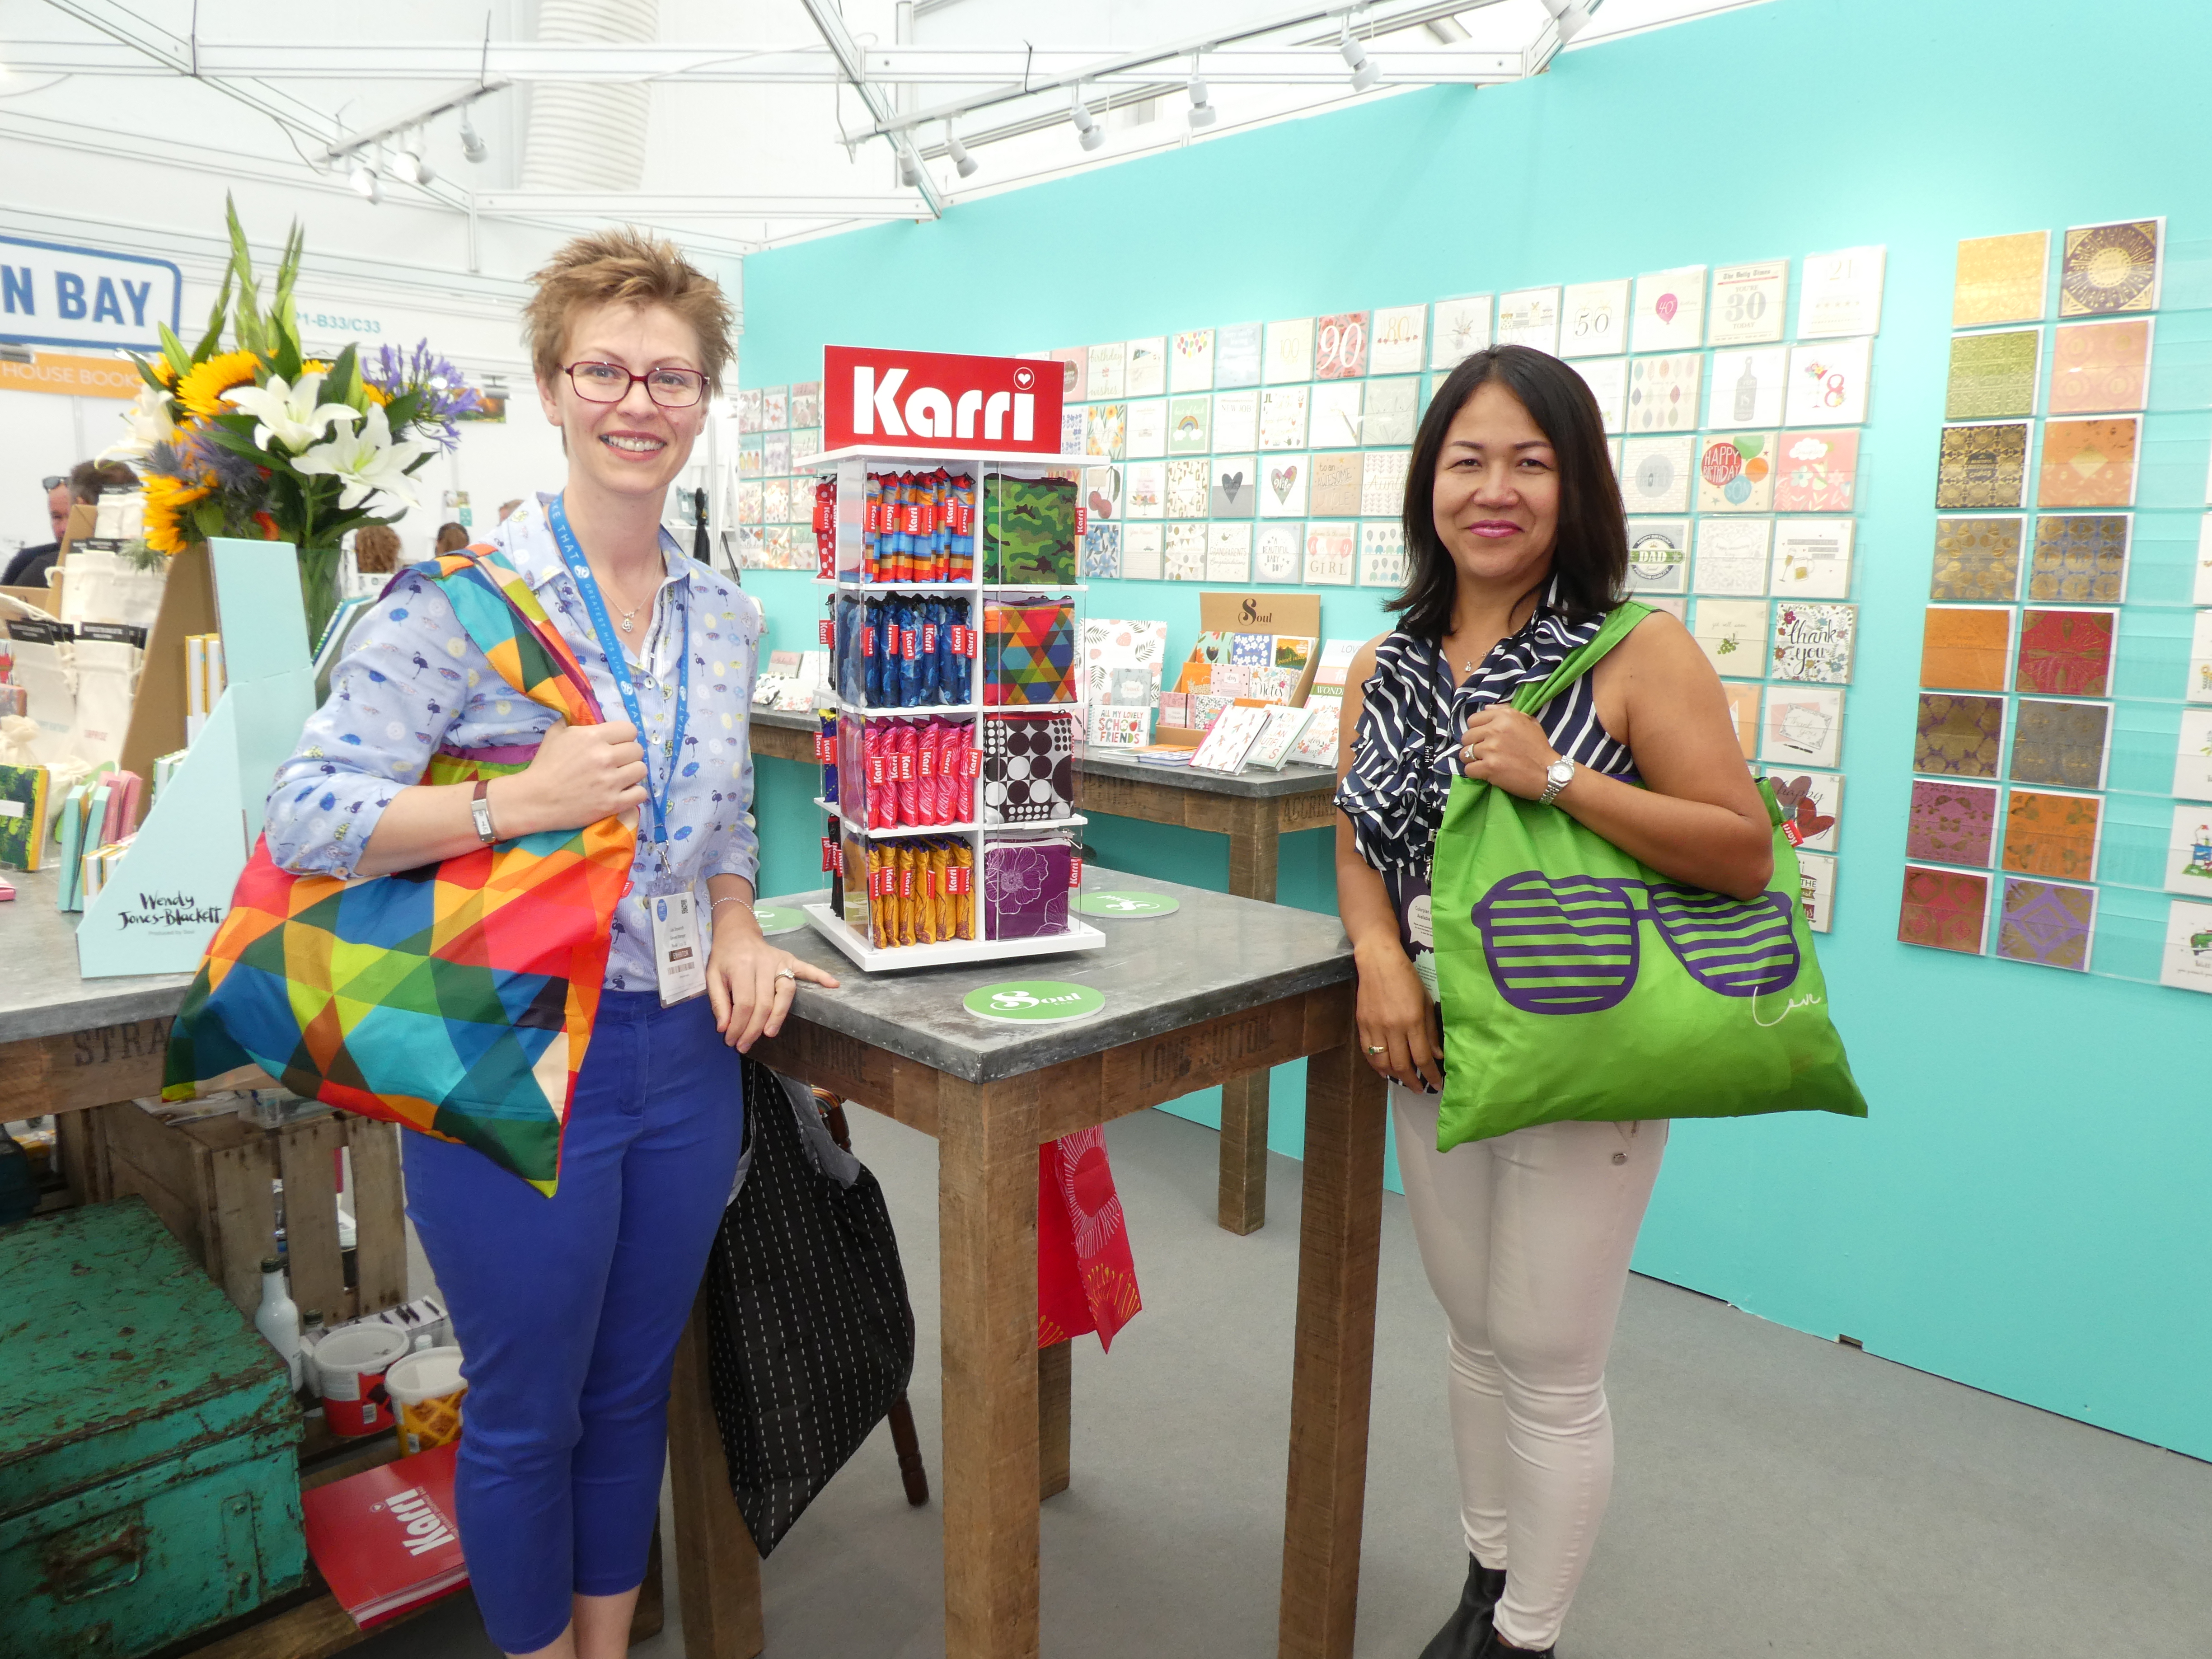 Above: Soul/Really Good’s Lisa Shoesmith (left) with Maranda Bukong each with a Karri bag on the stand at Harrogate.